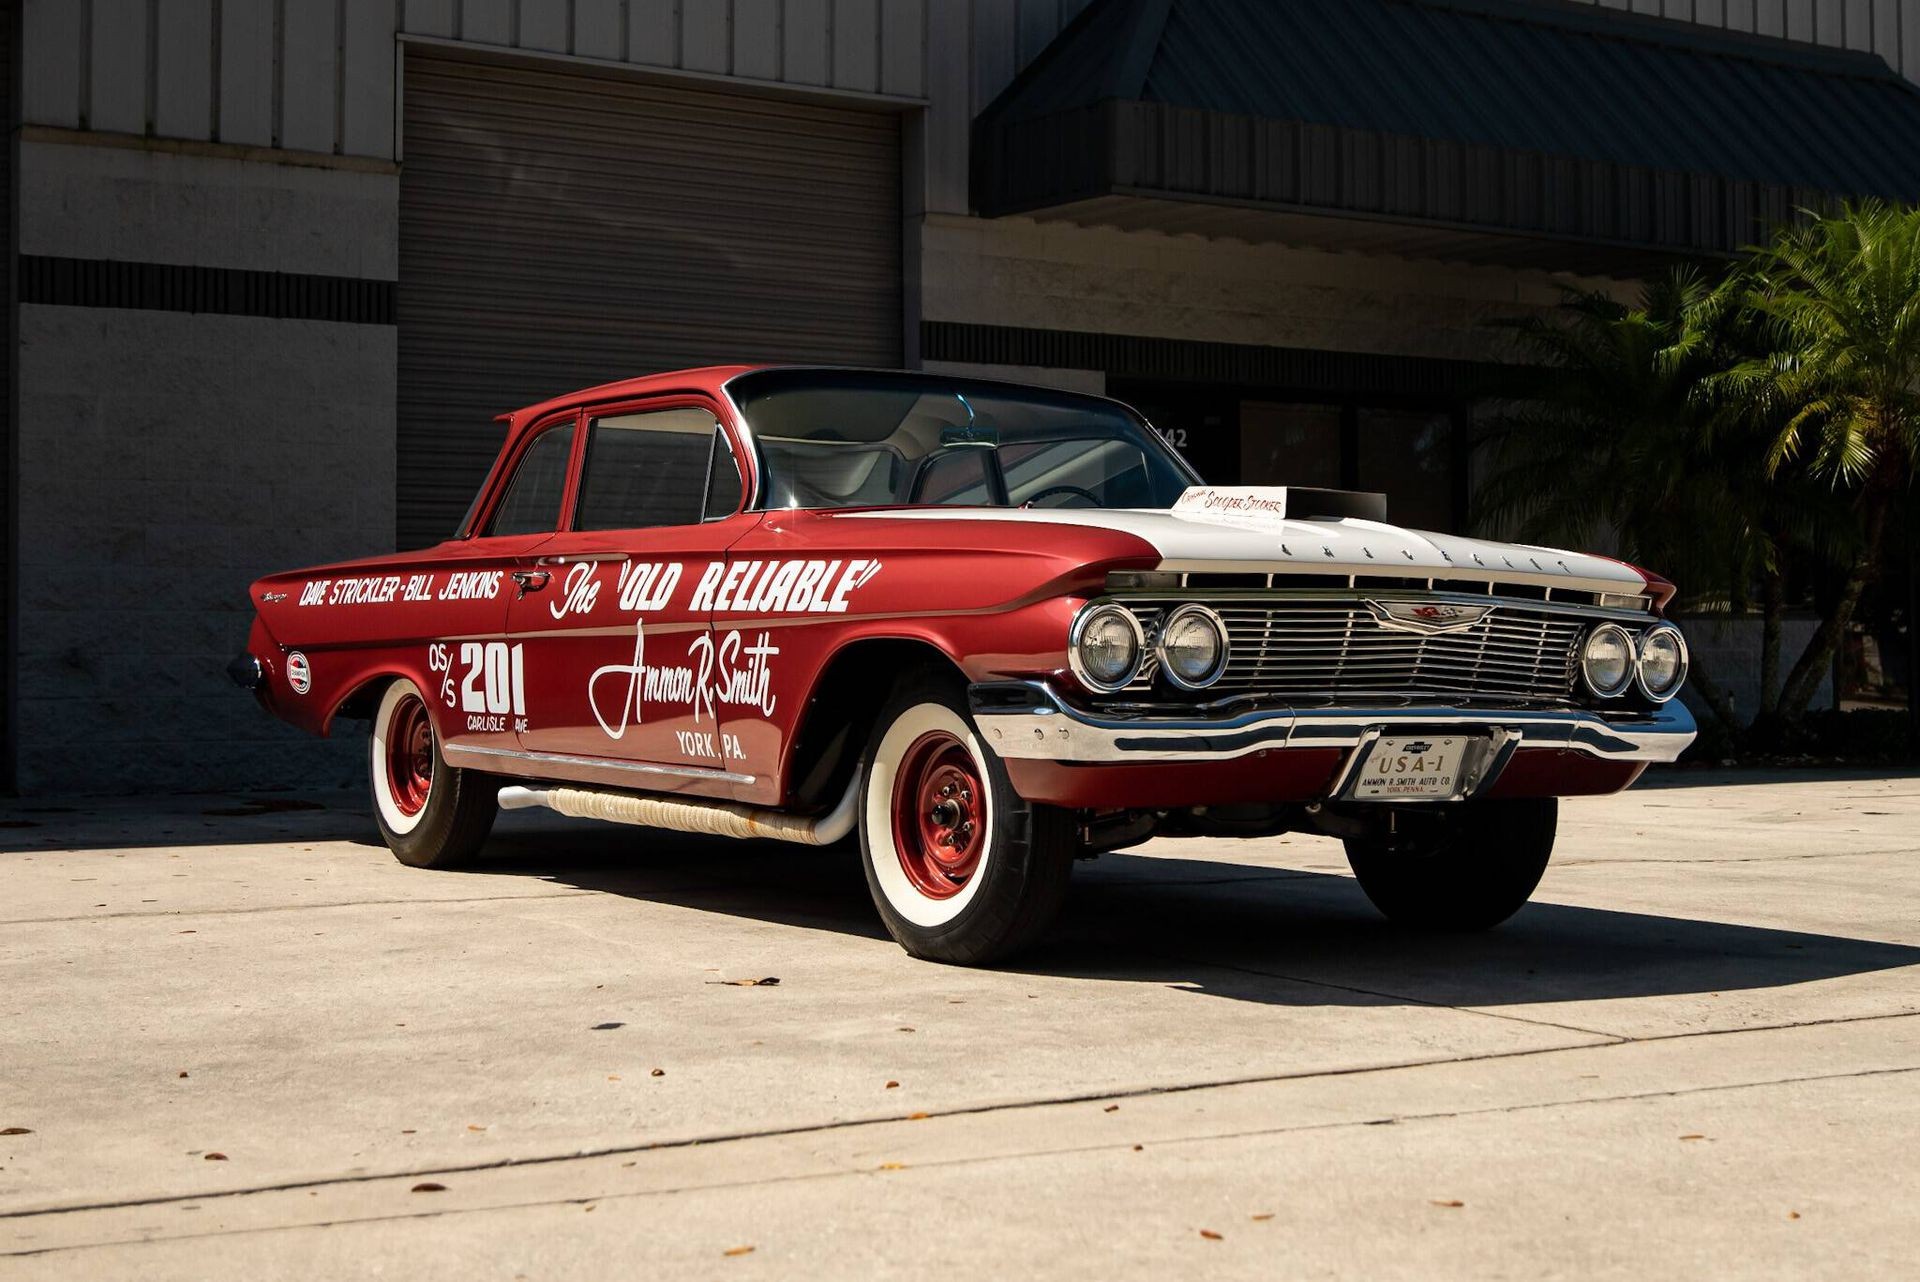 Find of the Day: This 1961 Chevrolet Biscayne 